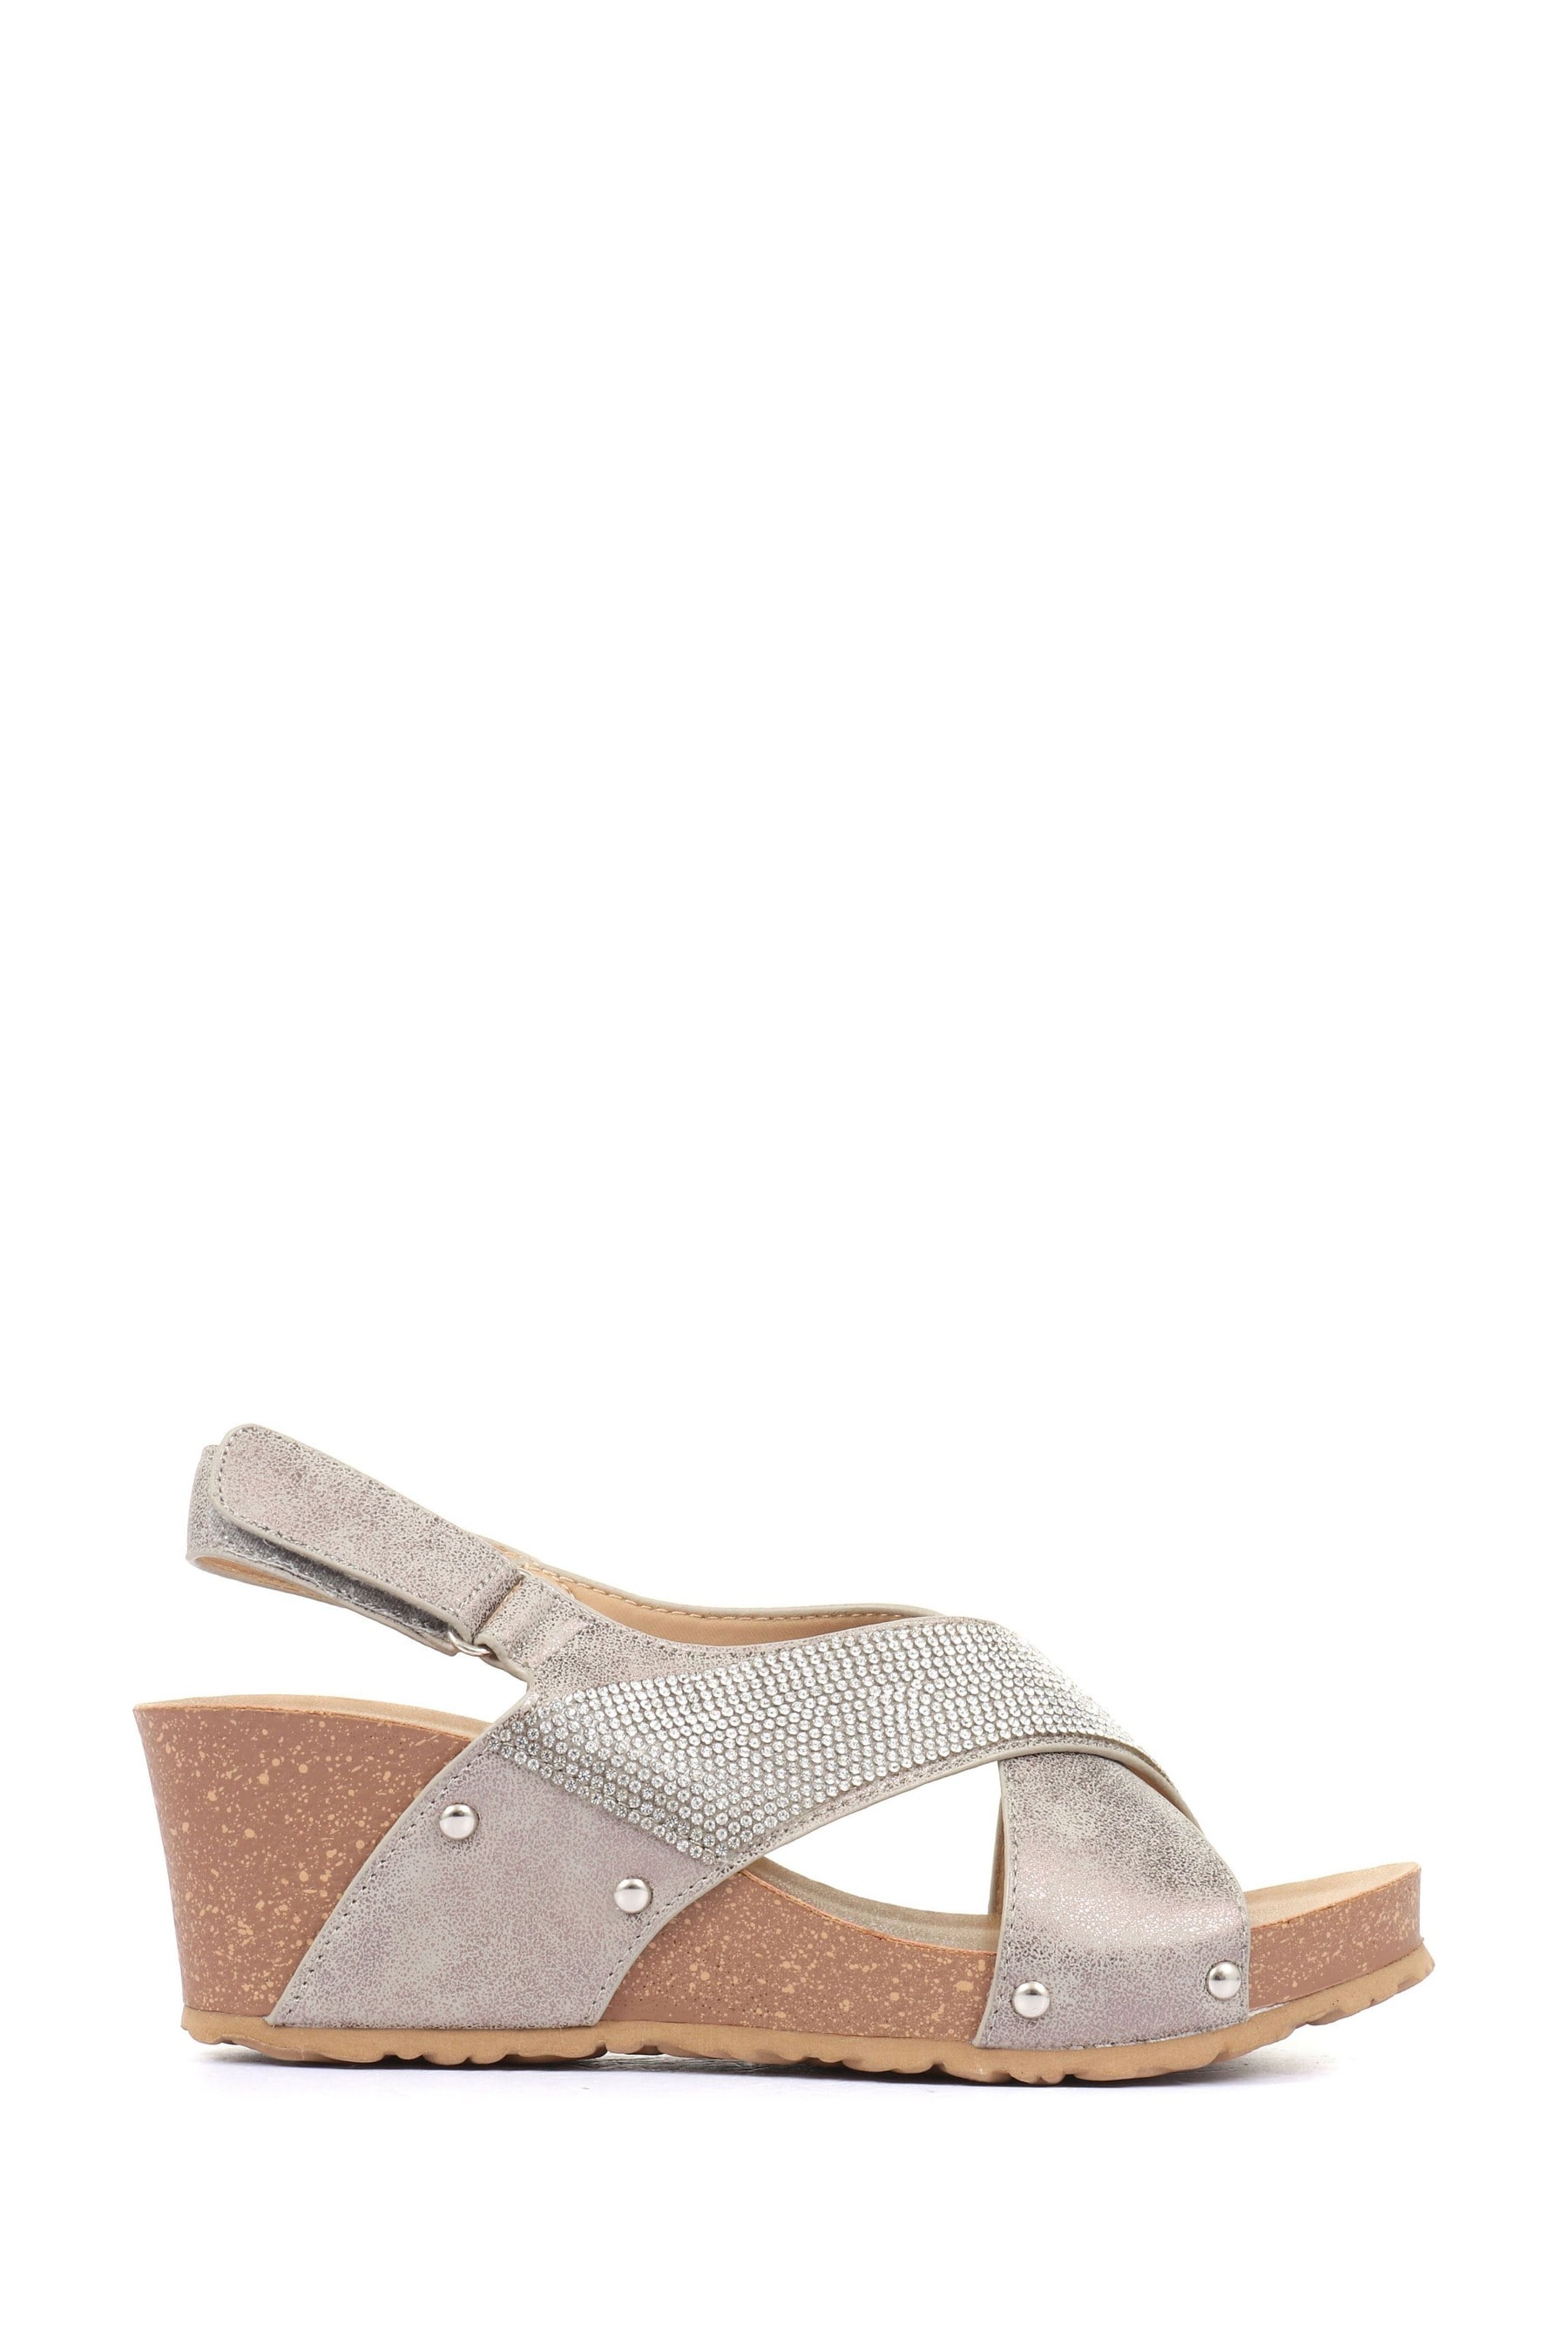 Buy Bellissimo Silver Wide Fit Wedge Sandals from Next Ireland